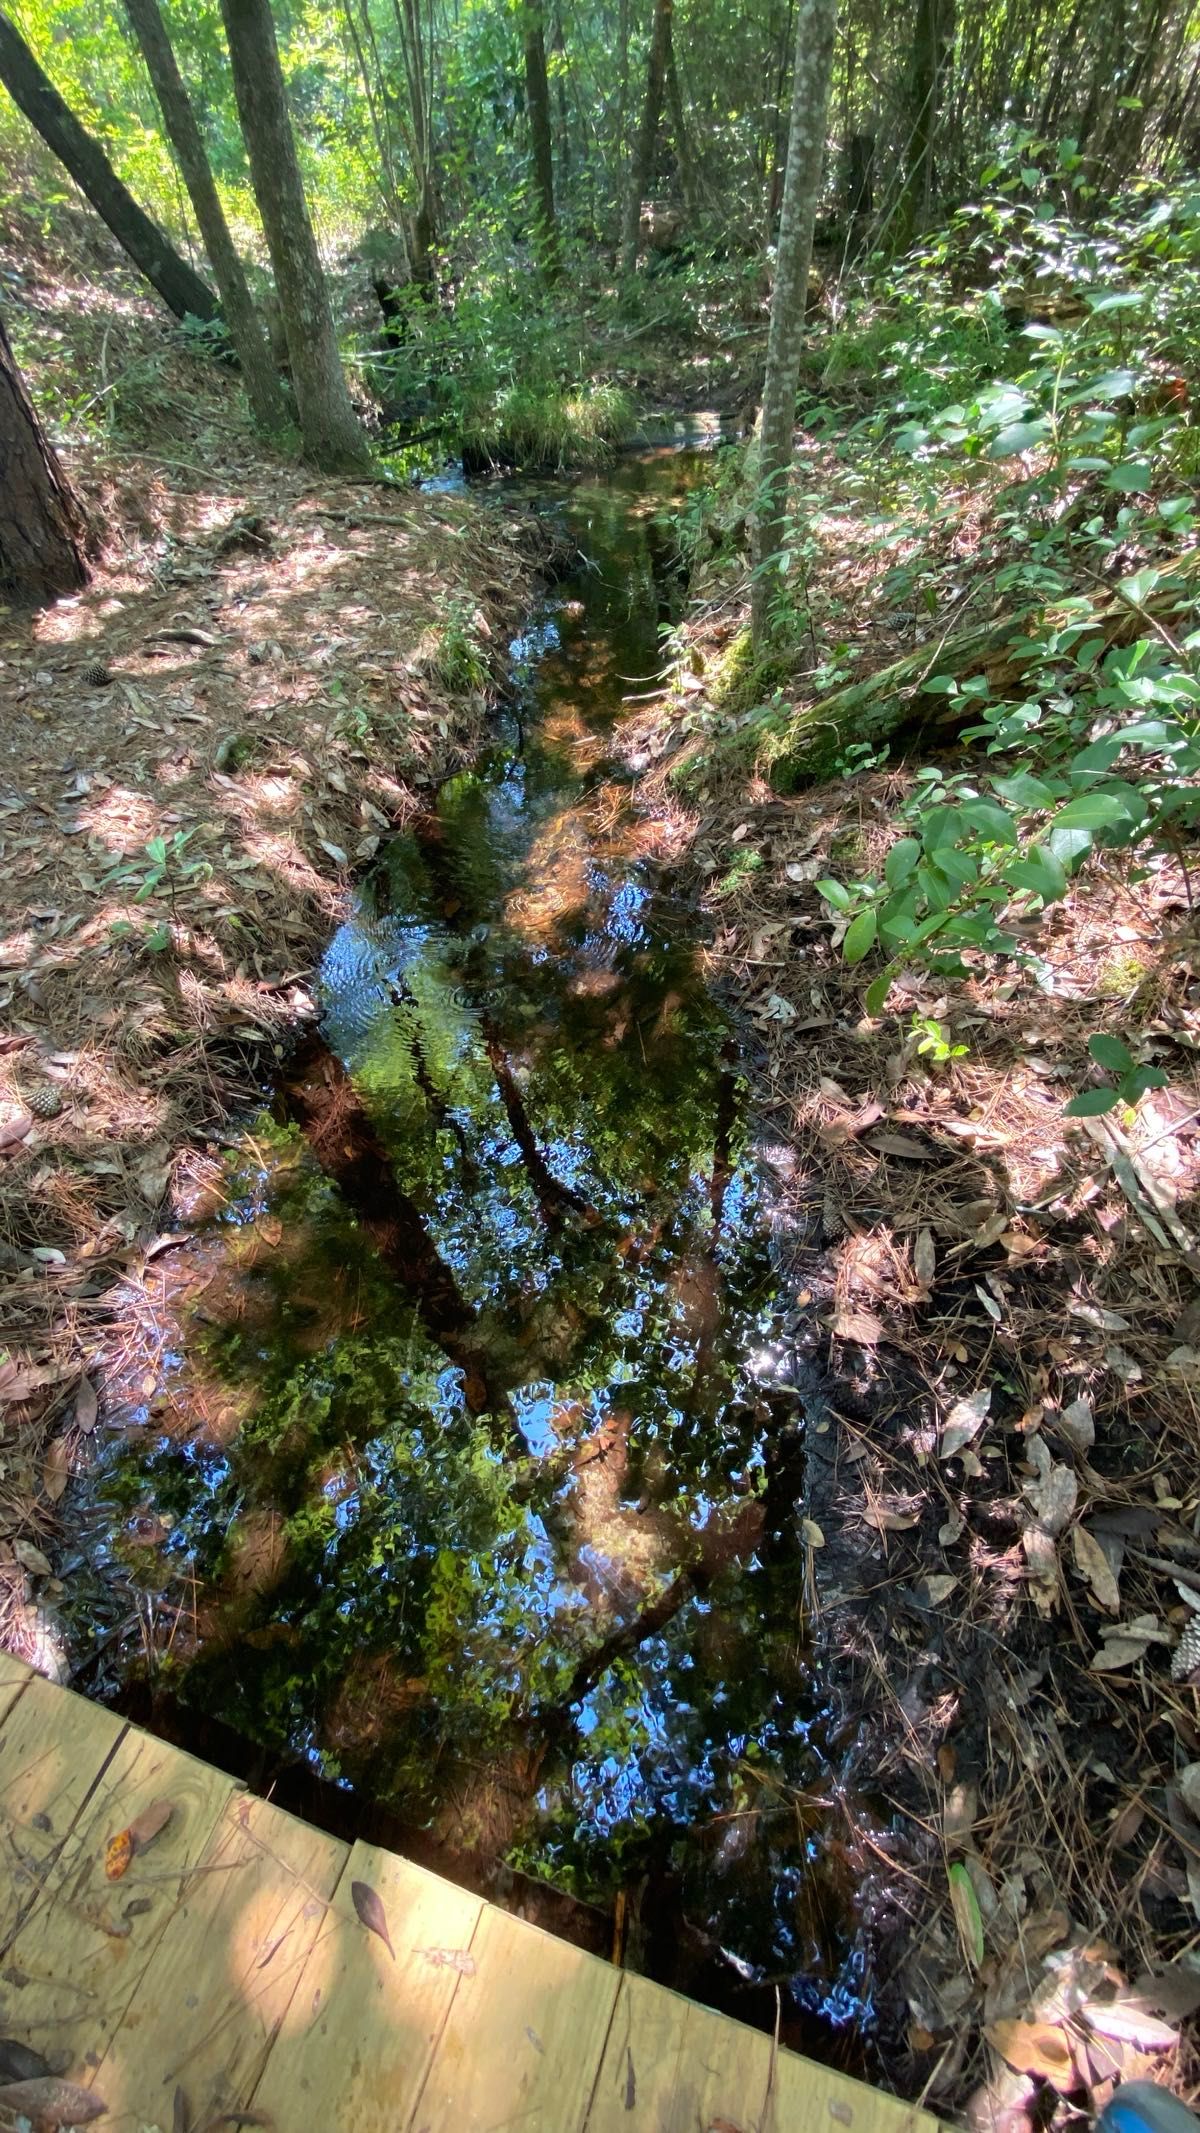 Imagine my delight on a hike as I came across a spring fed creek to dip bare feet in and cool off on a triple digit heat index day.